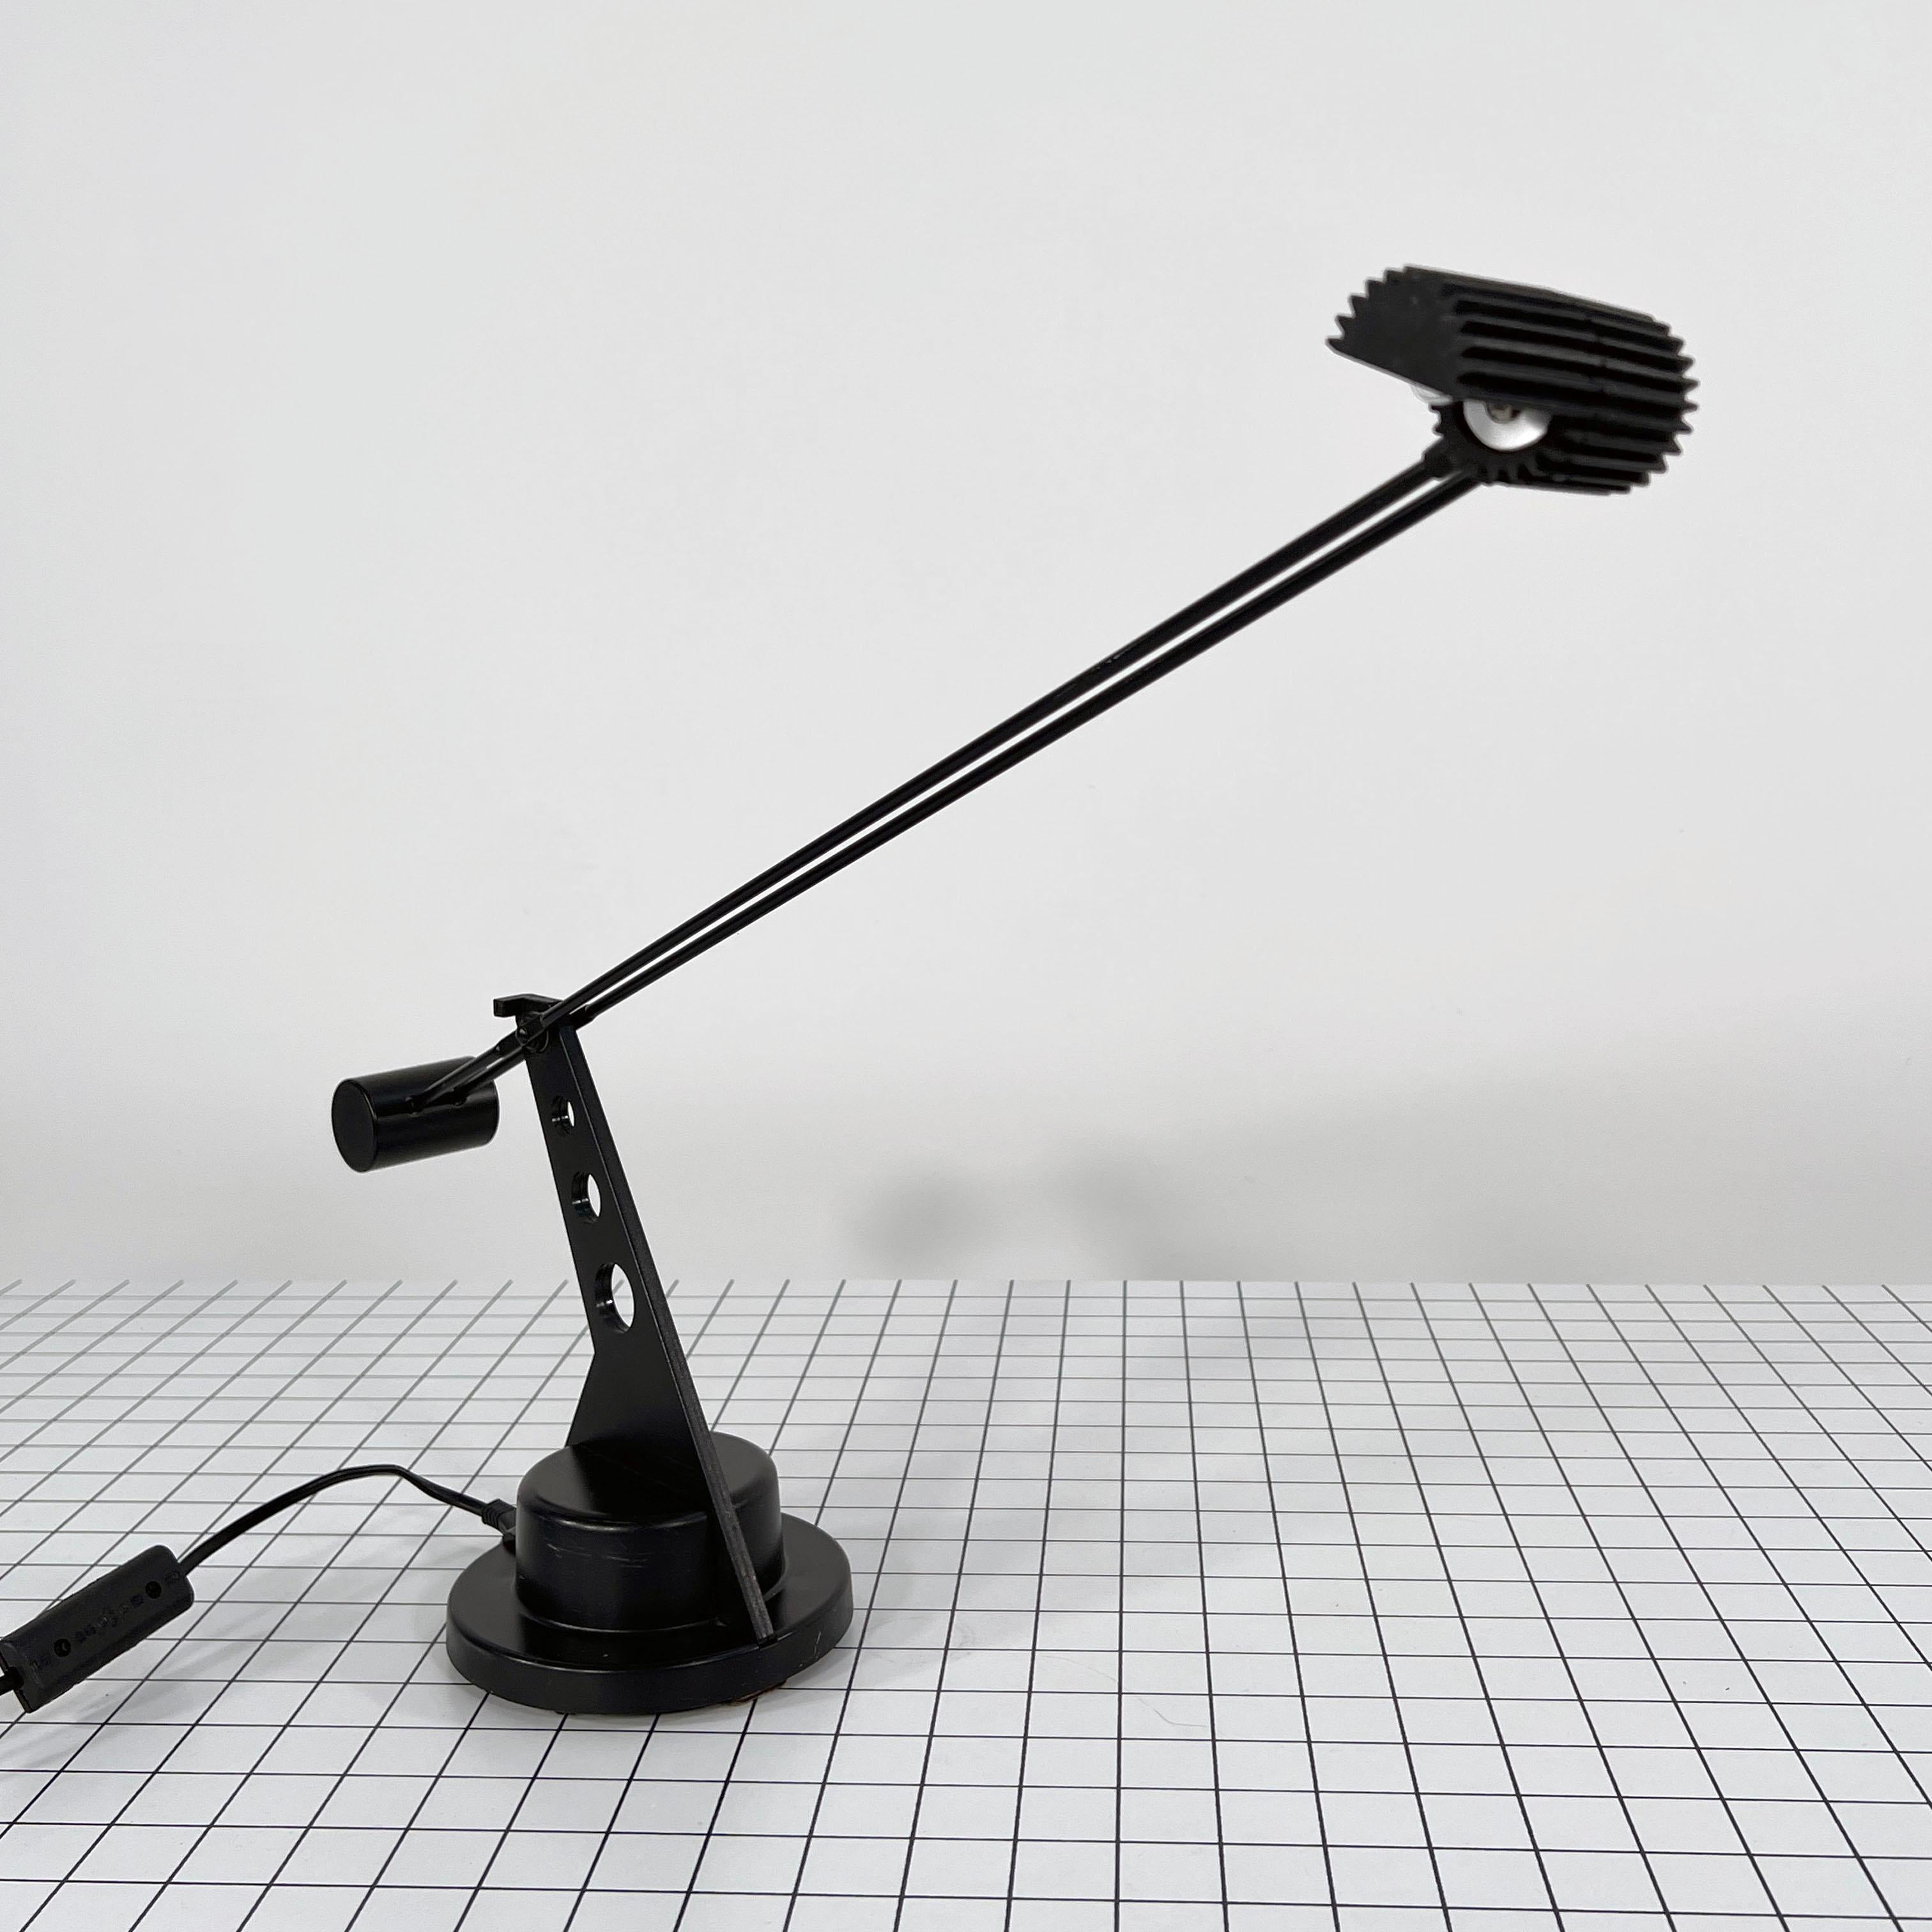 Producer - Luxo
Design Period - Eighties 
Measurements - Width 15 cm x Depth 62 cm x Height 40 cm 
Materials - Plastic, Metal
Color - Black
Condition - Good 
Comments - Light wear consistent with age and use.
  